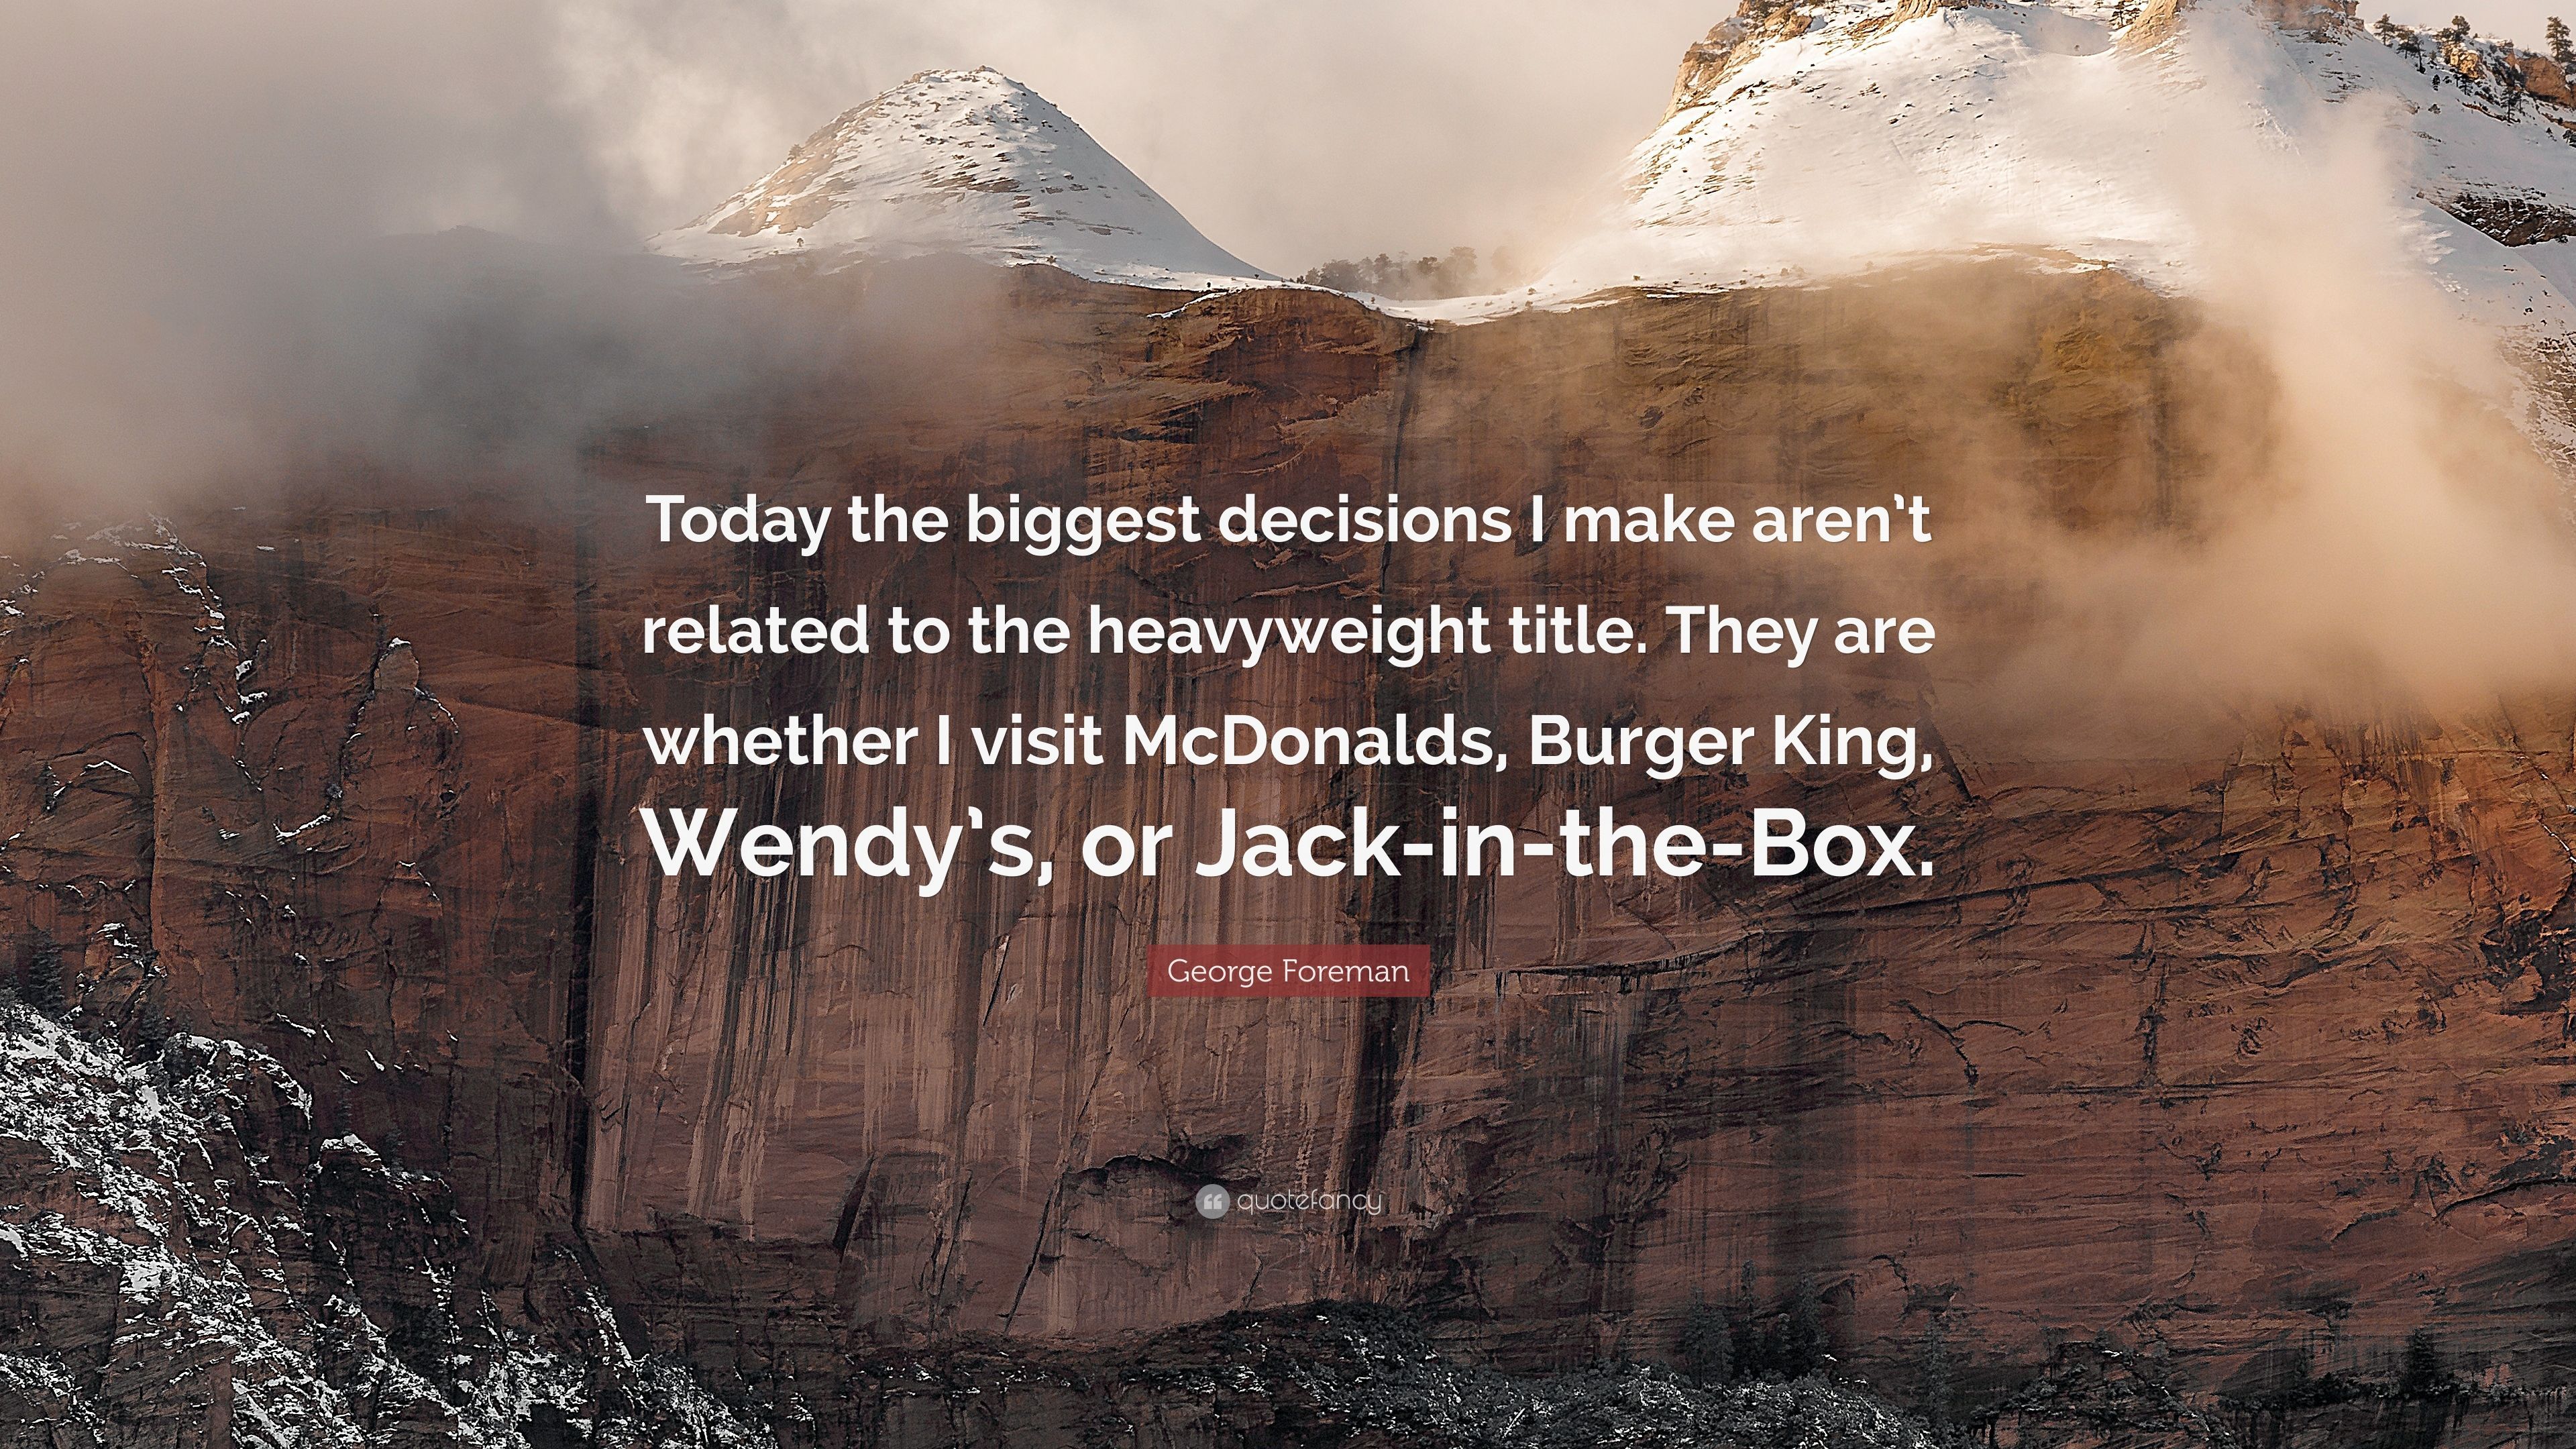 George Foreman Quote: “Today the biggest decisions I make aren't